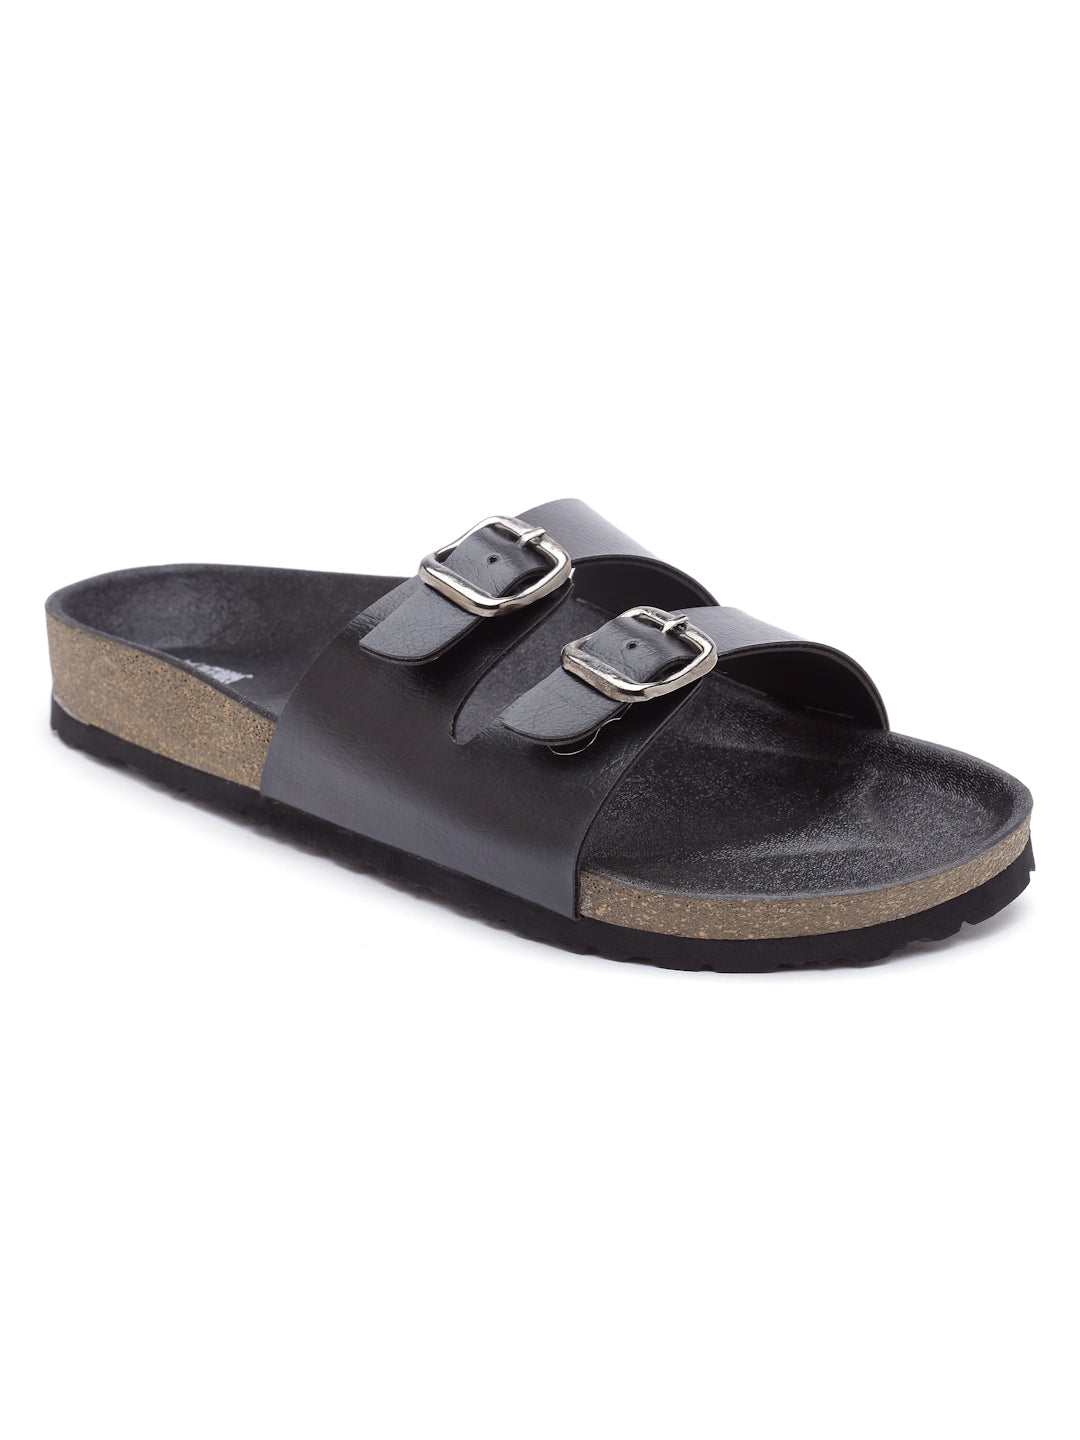 Women's Black Synthetic Leather Casual Sandal